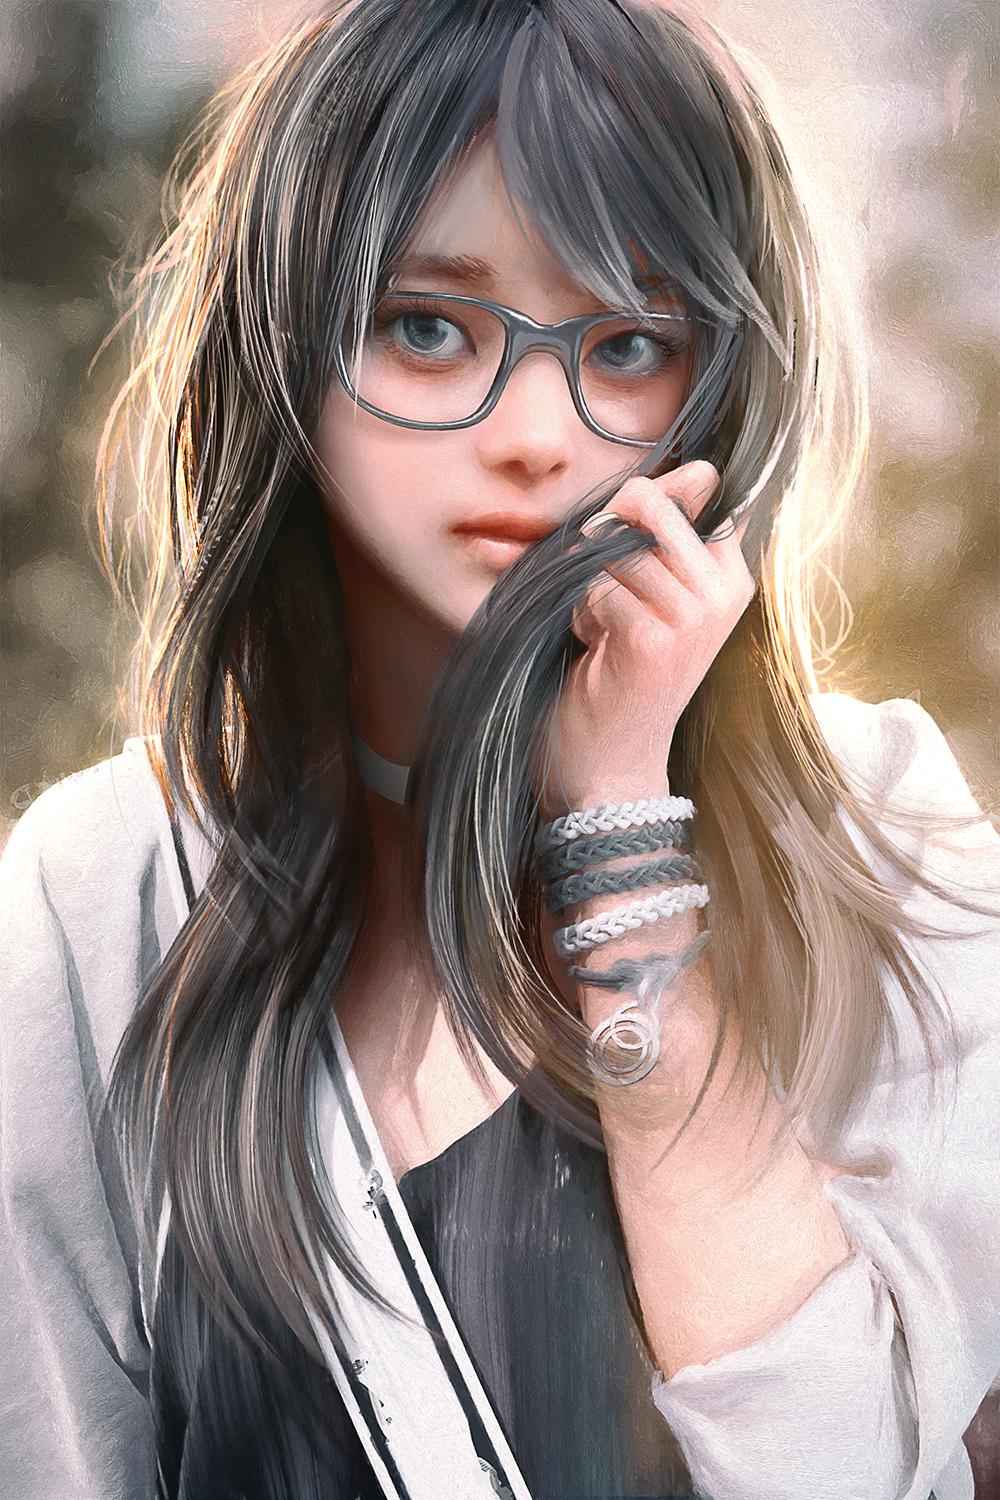 Another Girl with Glasses